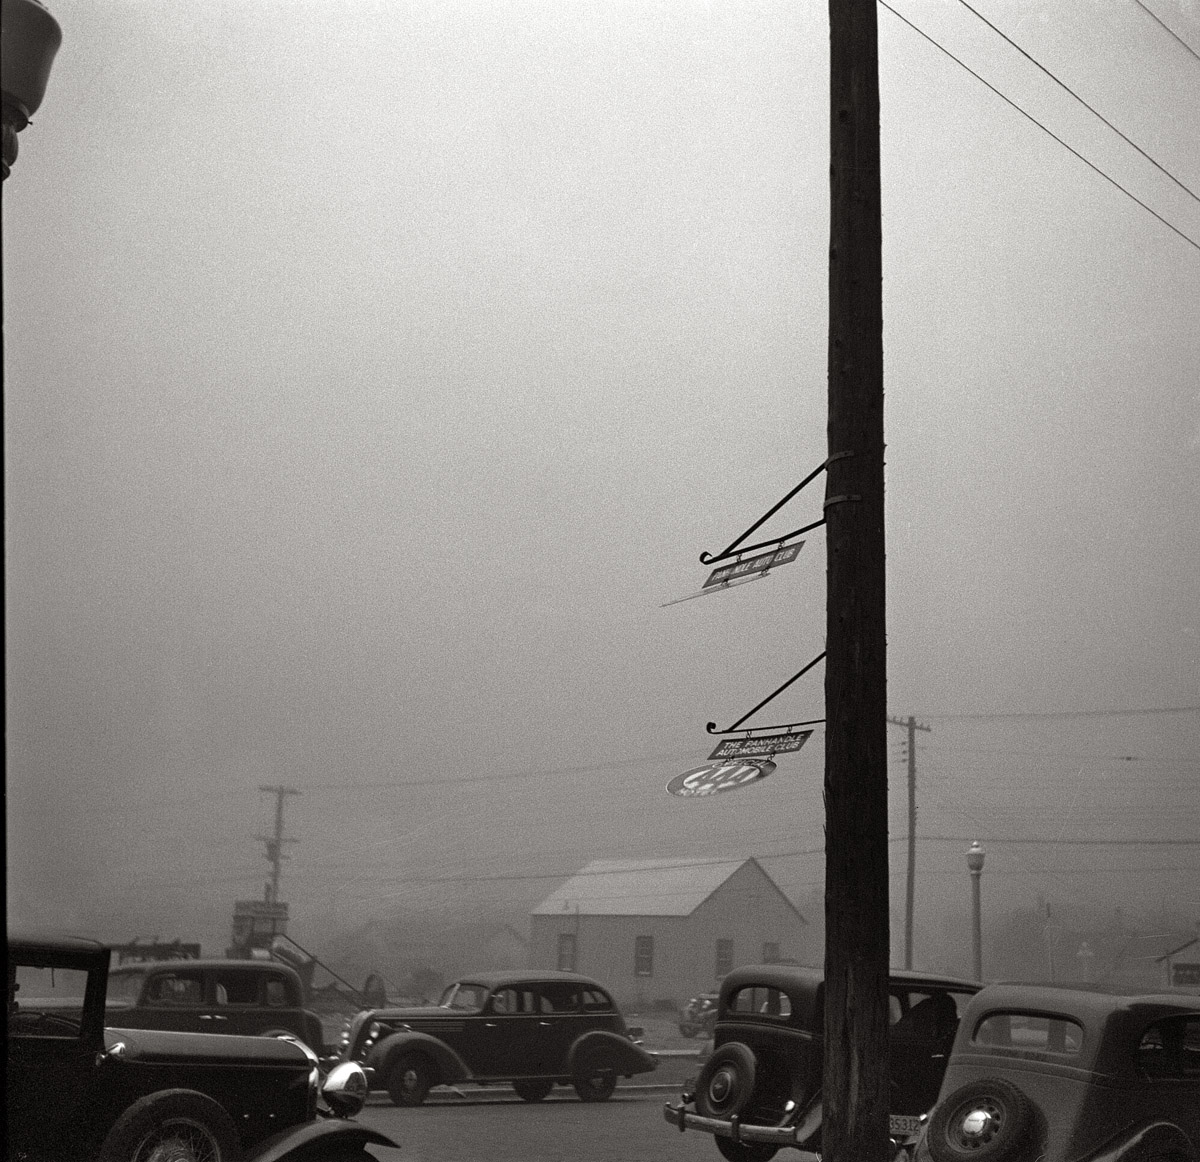 April 1936. "Dust storm. Note heavy metal signs blown out by wind. Amarillo, Texas." Medium format nitrate negative by Arthur Rothstein. View full size.